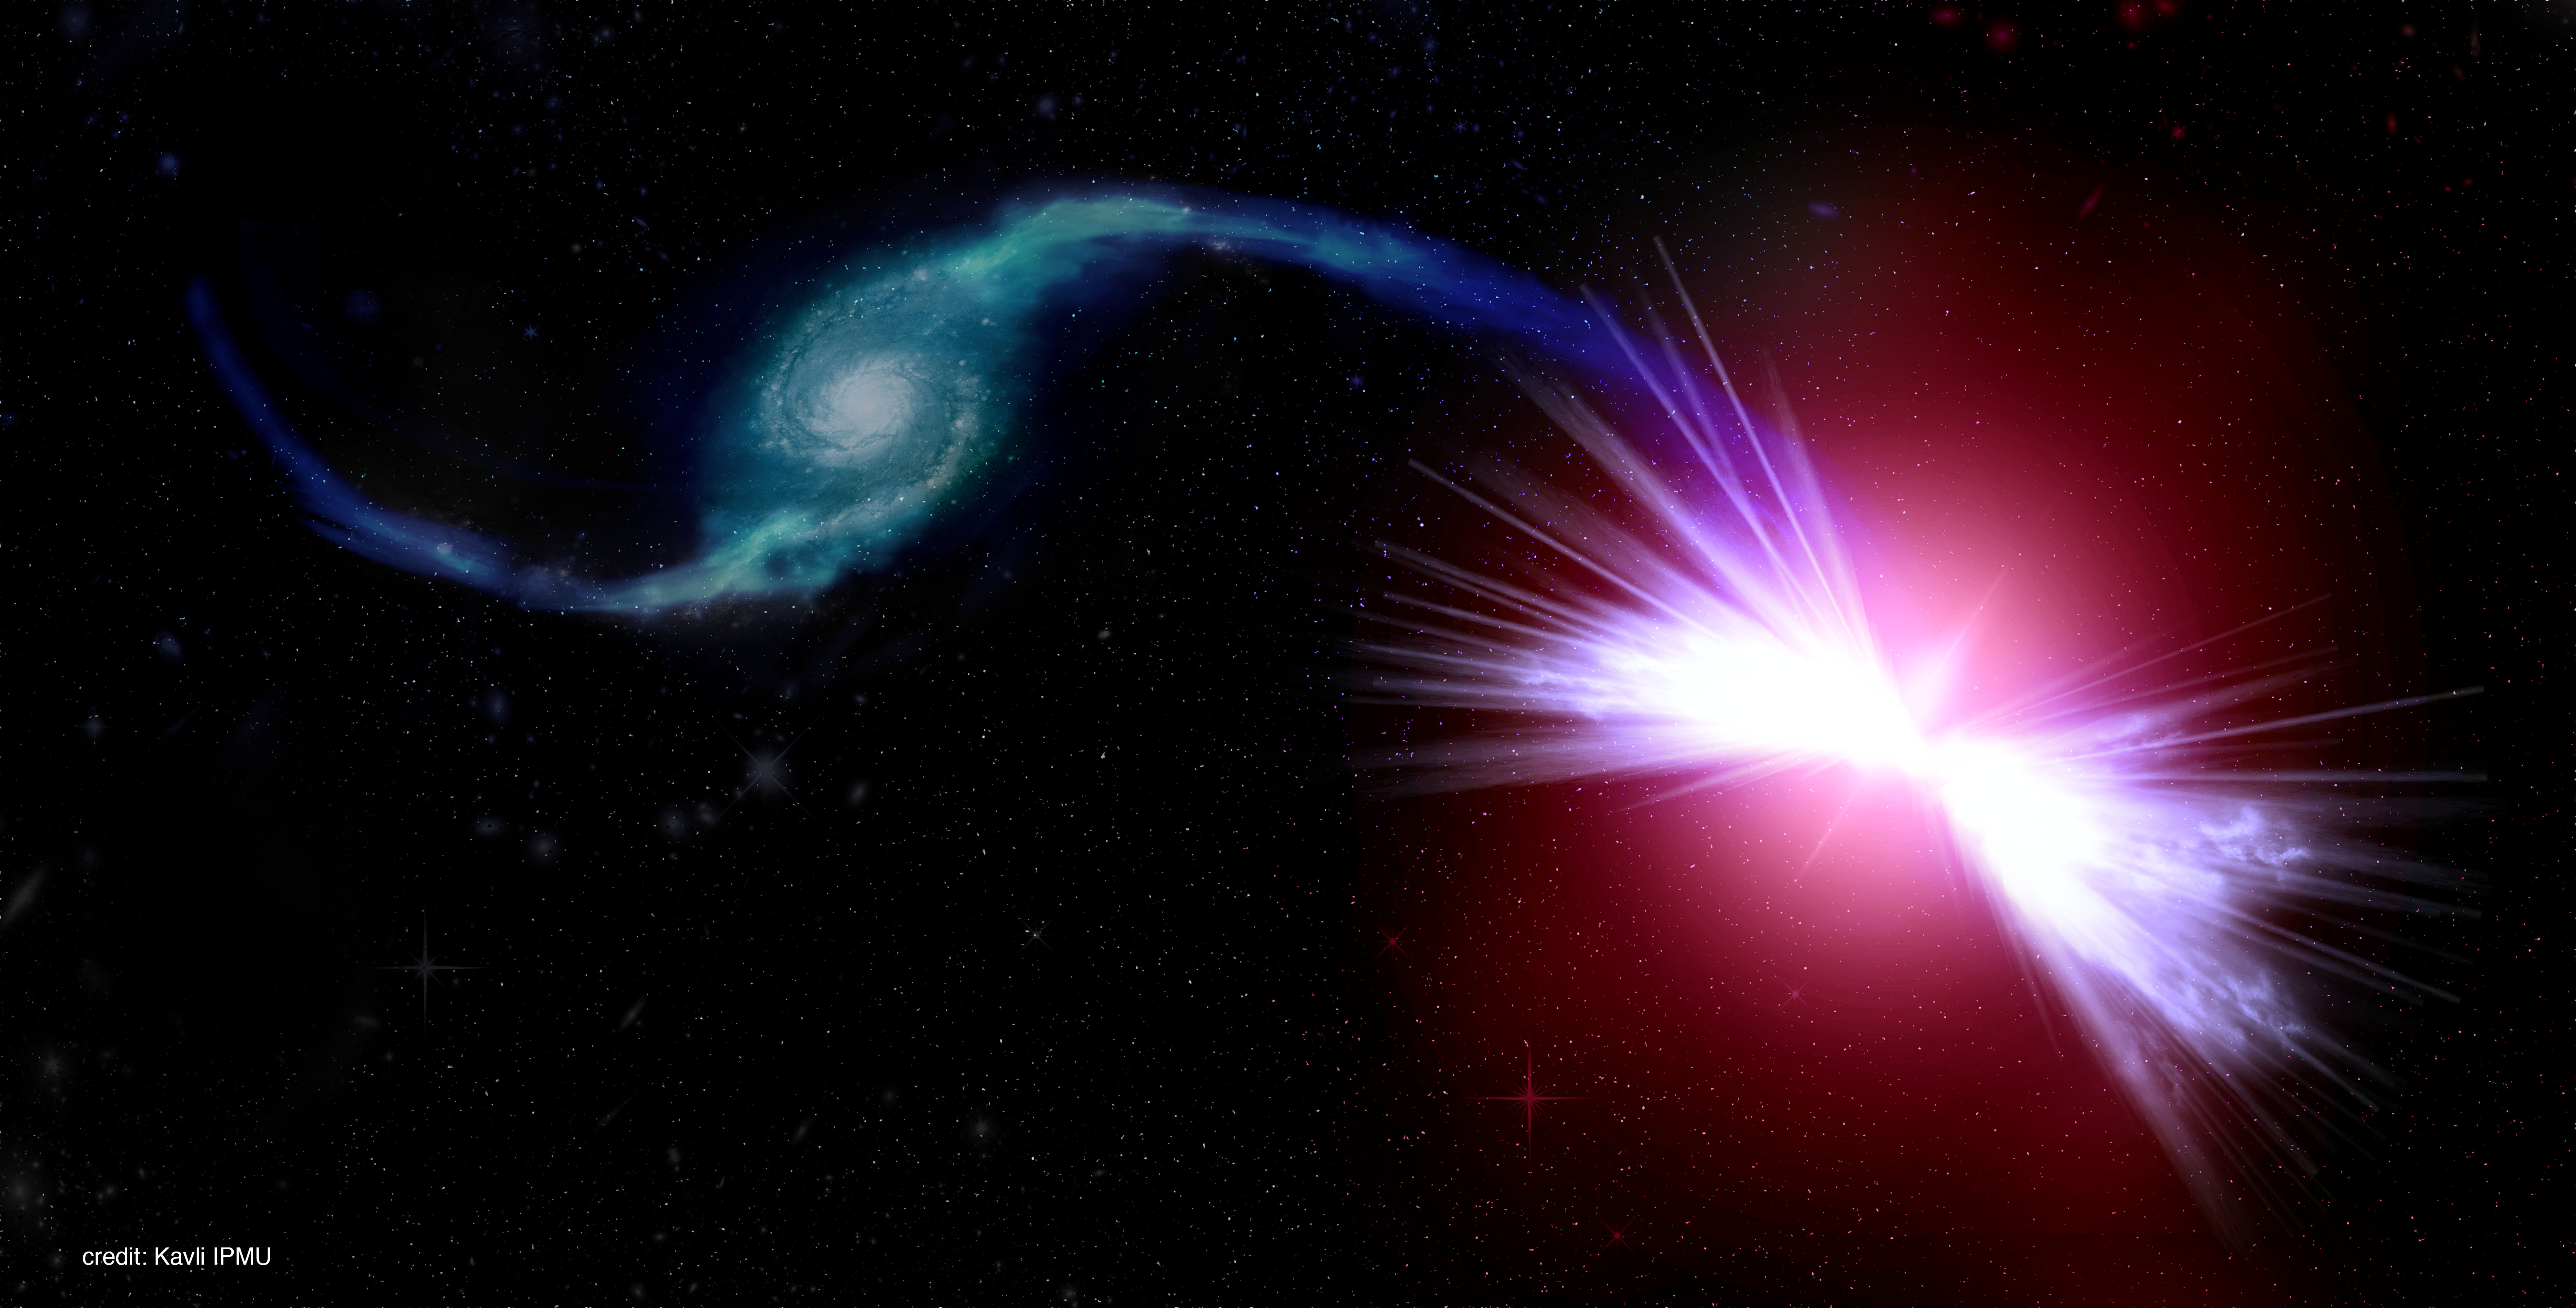 <p class='lead'>An artist’s rendition of the galaxies Akira (right) and Tetsuo (left) in action.</p>

Akira’s gravity pulls Tetsuo’s gas into its central supermassive black hole, fueling winds that have the power to heat Akira’s gas. The action of the black hole winds prevents a new cycle of star formation in Akira.

<strong>Image Credit:</strong> Kavli IPMU